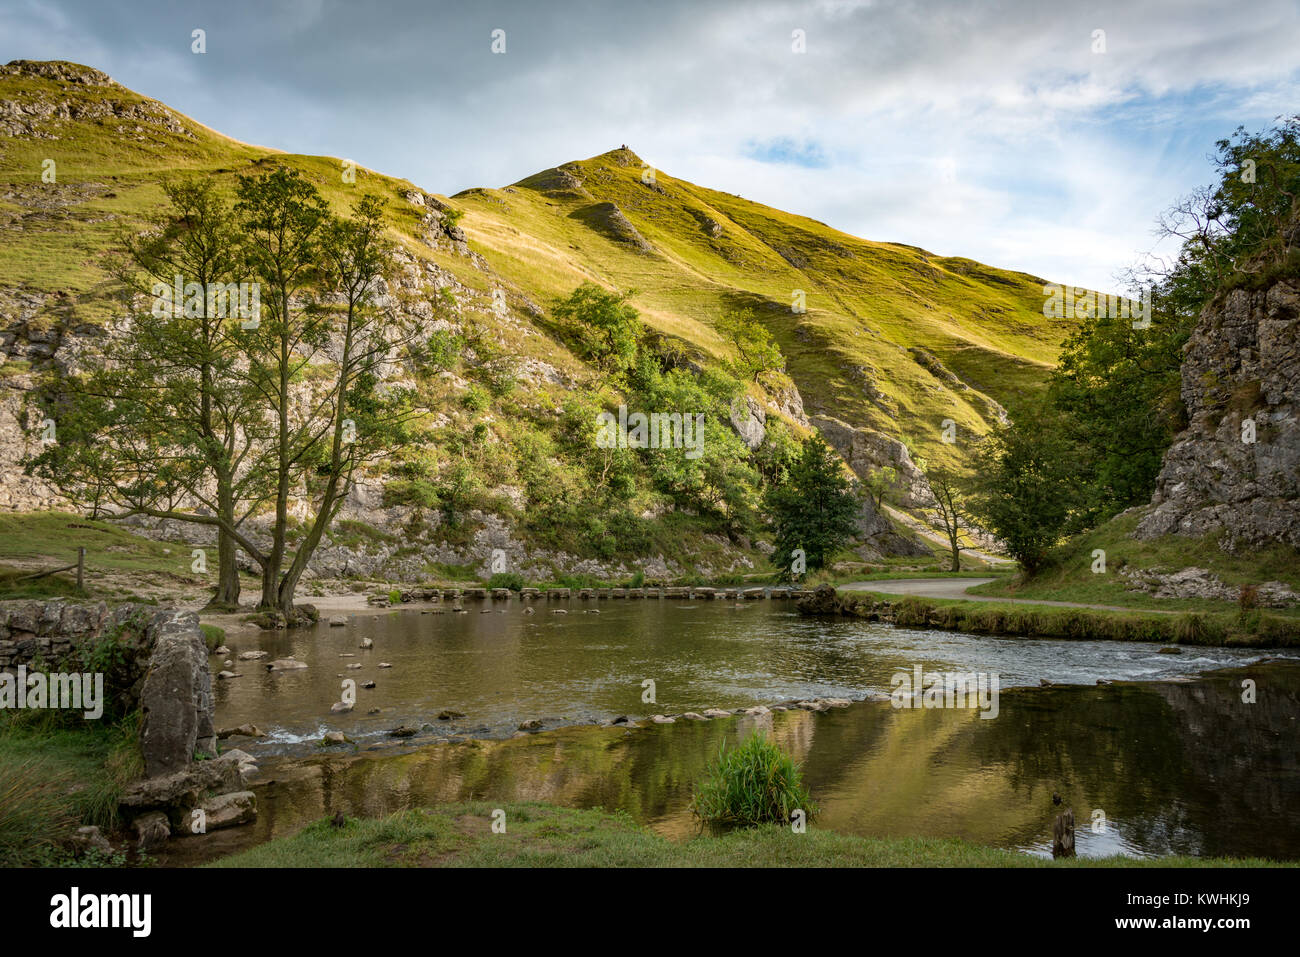 The stepping stones at Dovedale National Nature Reserve in the Peak District, Derbyshire Stock Photo